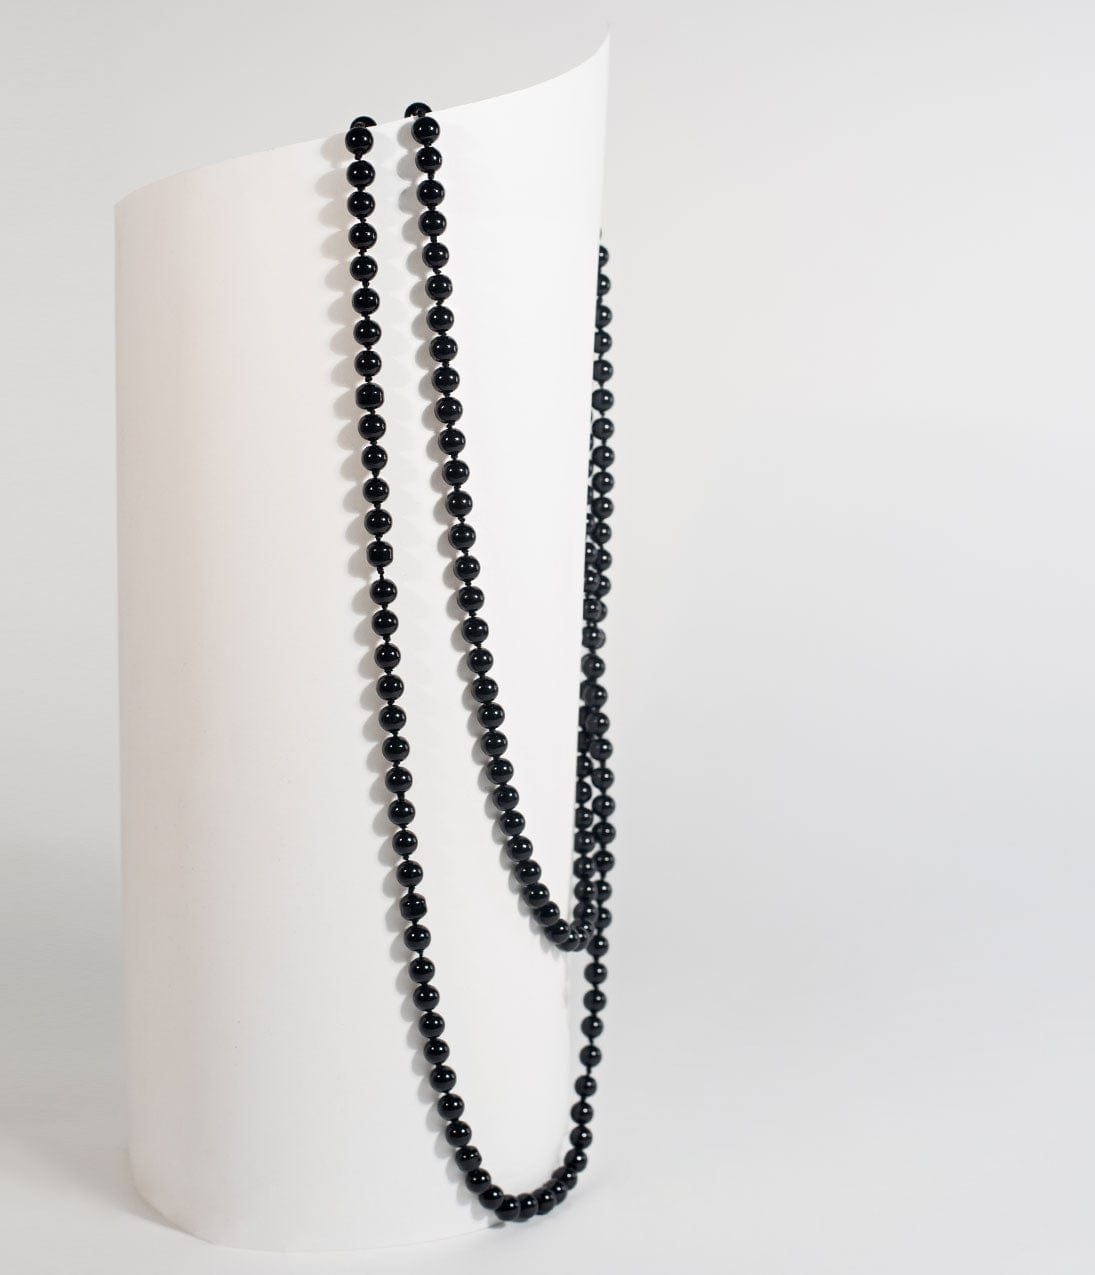 

Black 60" Long Pearl Necklace